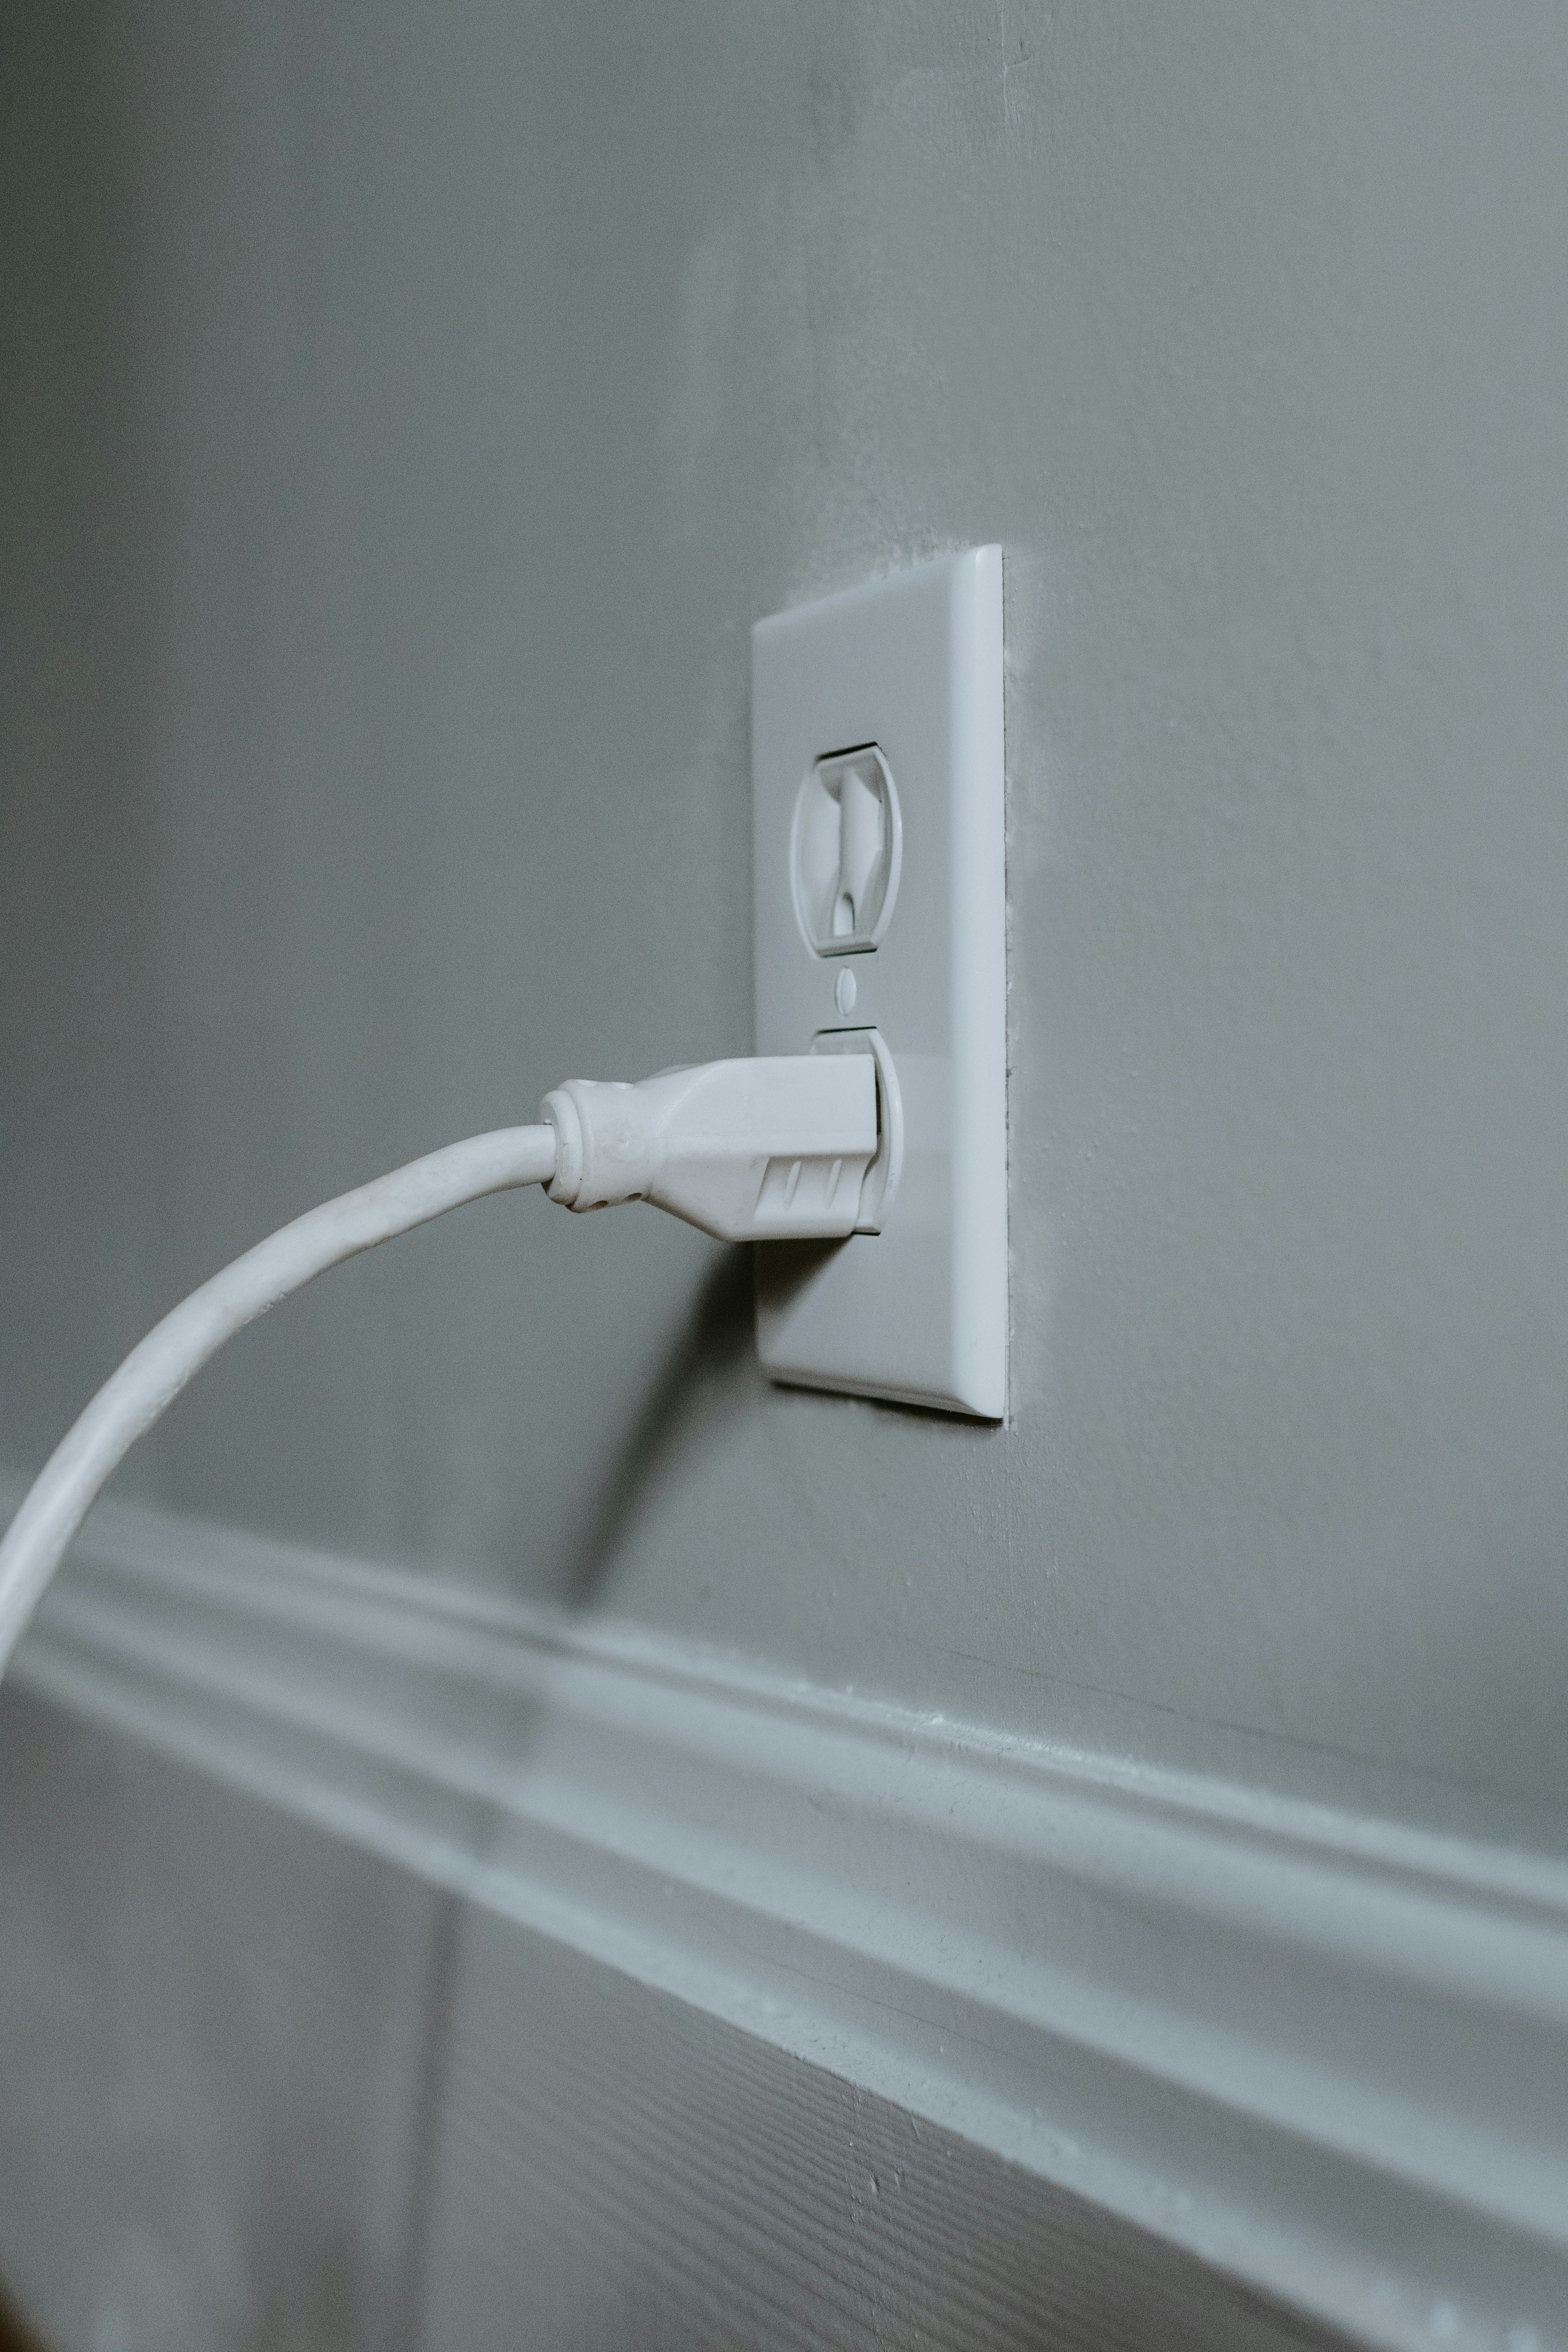 White plug plugged into an outlet on the wall